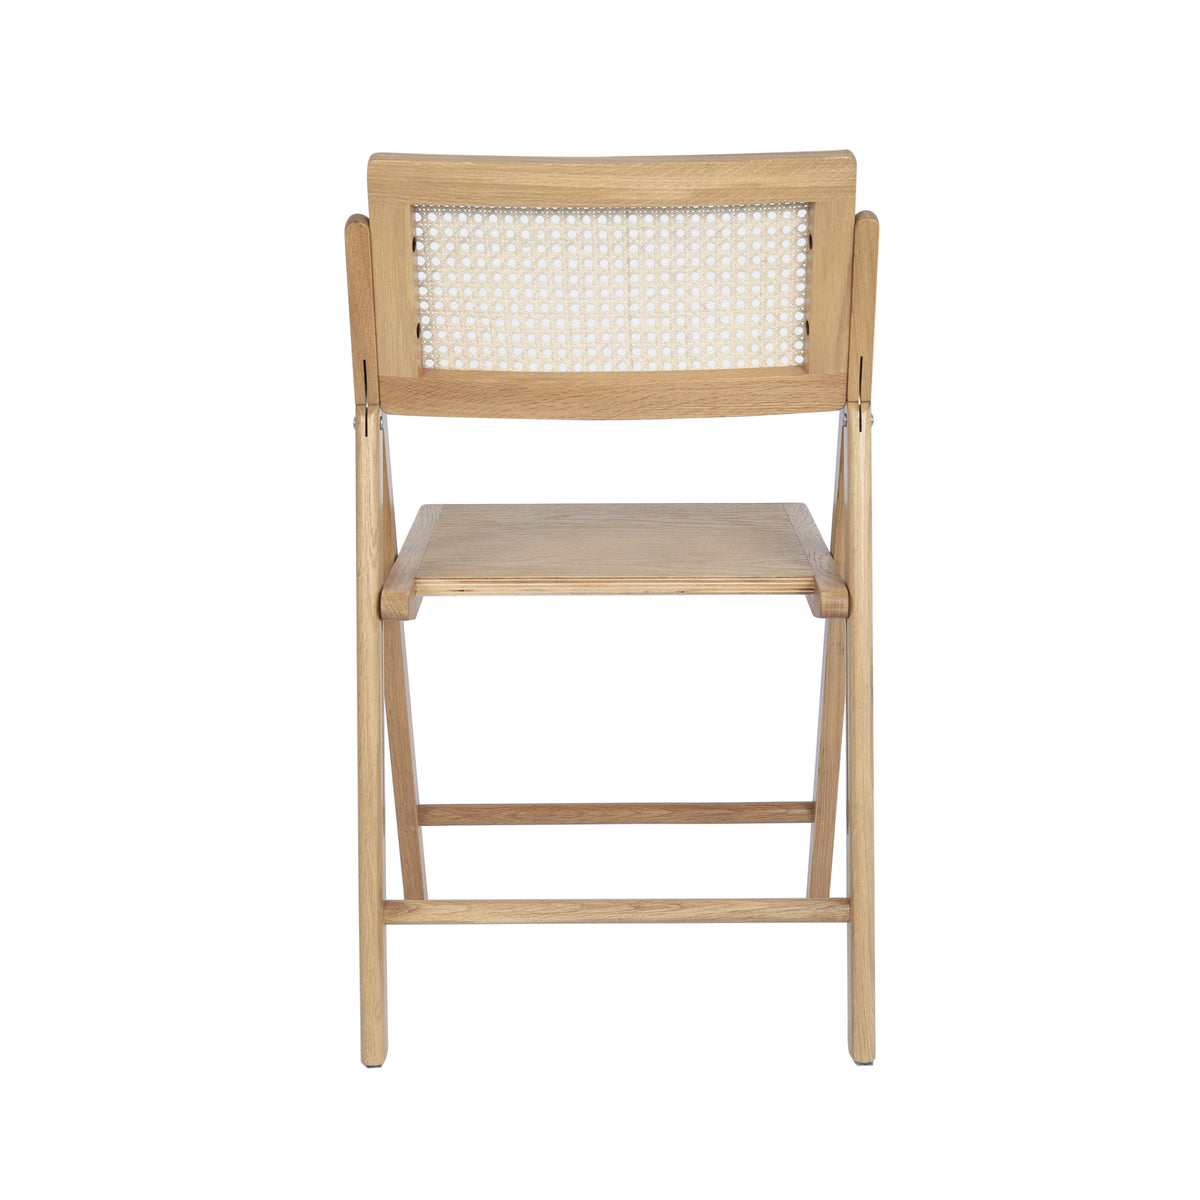 Natural |#| 2 Pack Commercial Cane Rattan Folding Chairs - Wood Backs and Seats - Natural